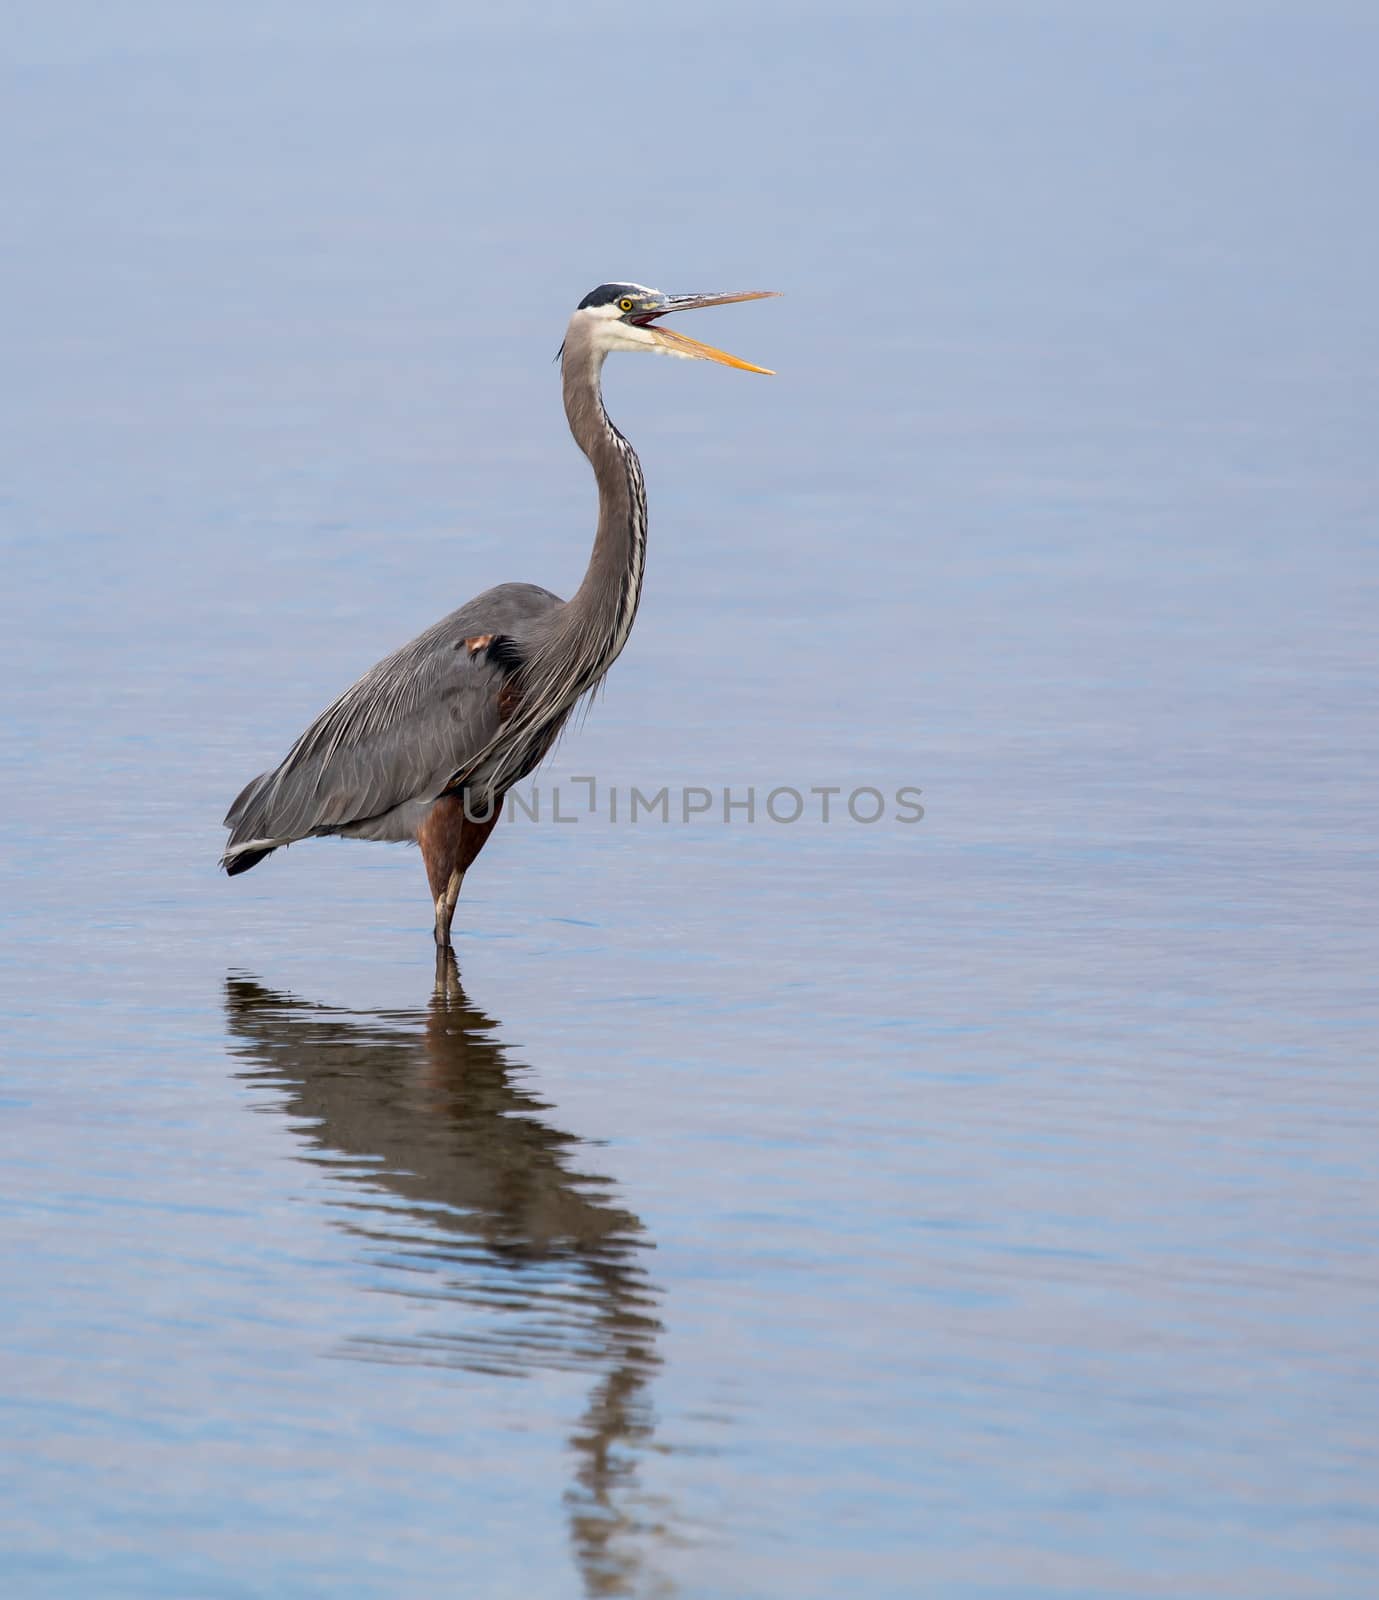 This is a Great Blue Heron squawking up a storm. It's a great greeting card cover as well as a piece to display.